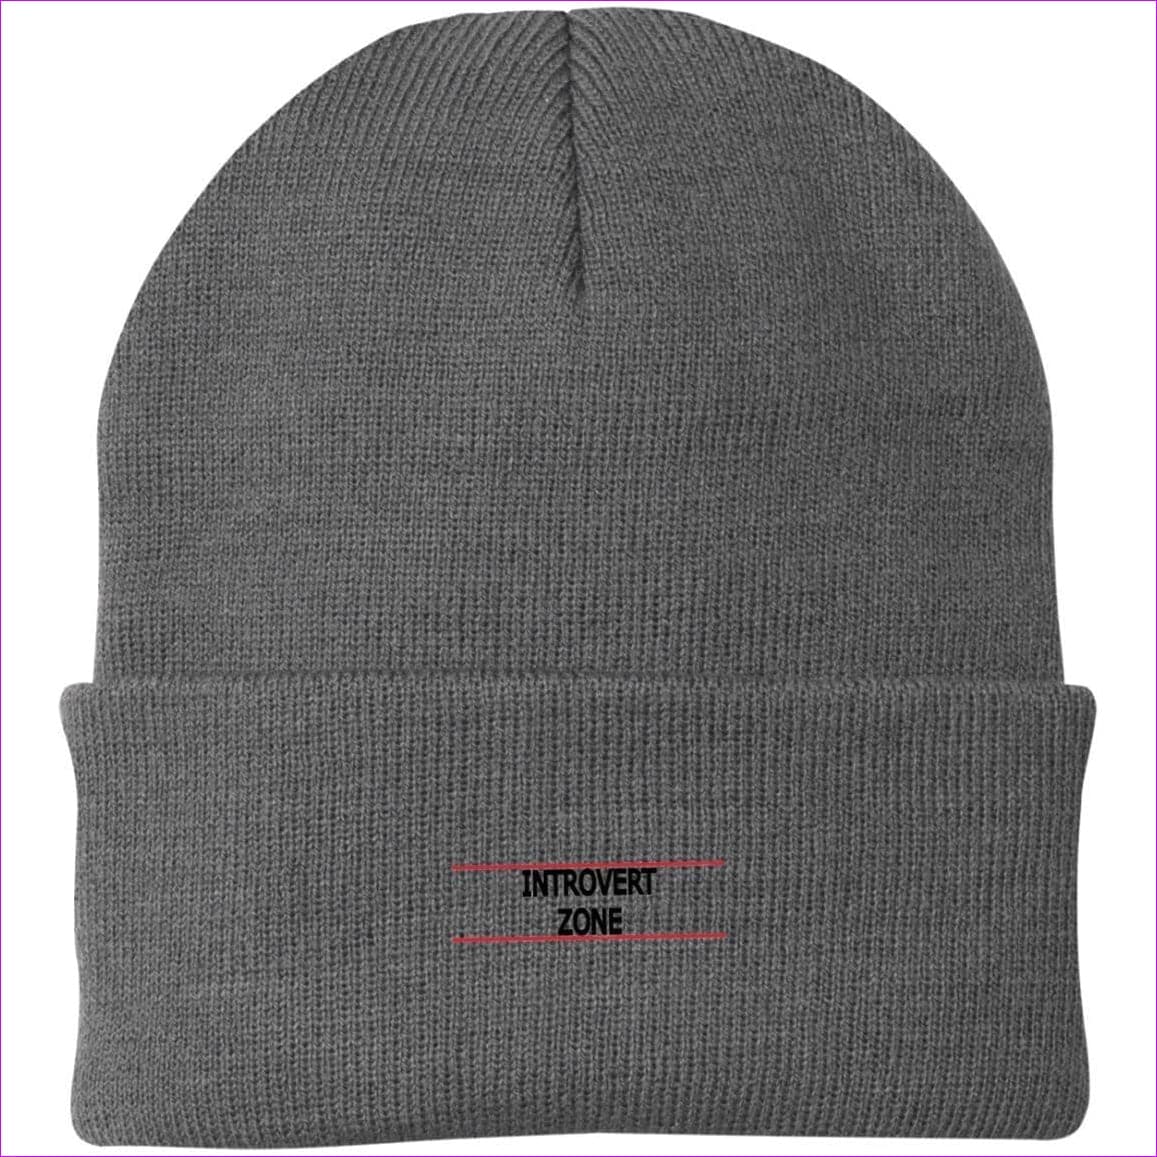 CP90 Knit Cap Athletic Oxford One Size Introvert Zone Embroidered Knit Cap, Cap, Beanie - Hat at TFC&H Co.